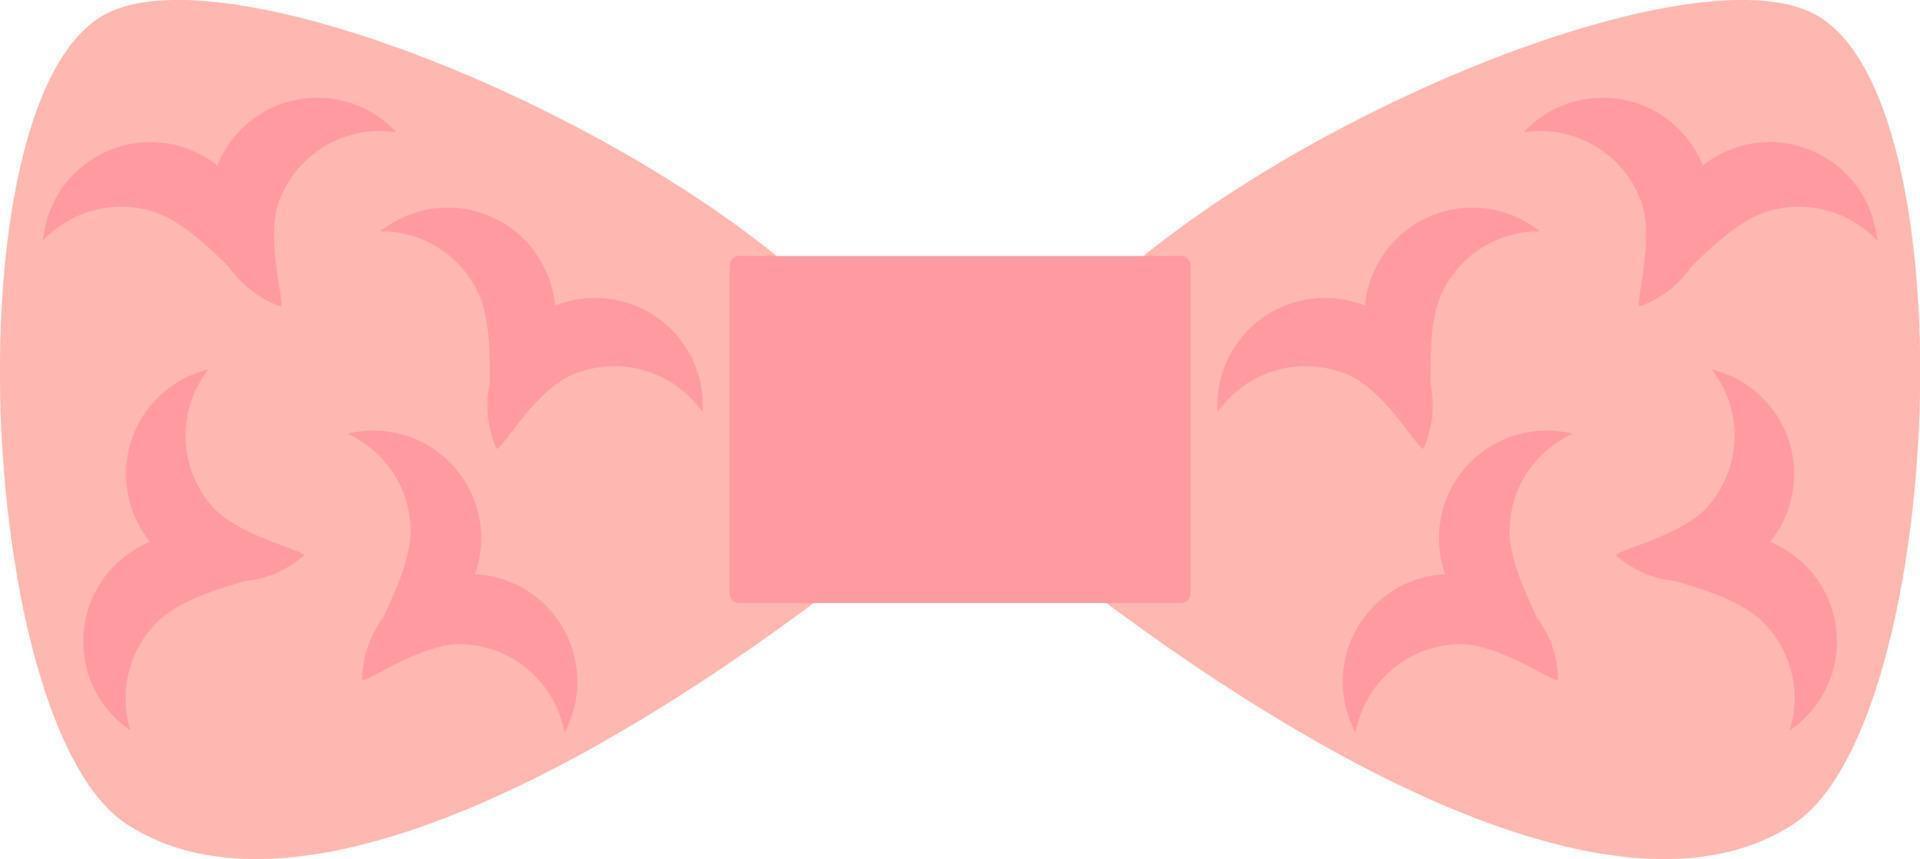 Pink bow with birds, illustration, vector, on a white background. vector